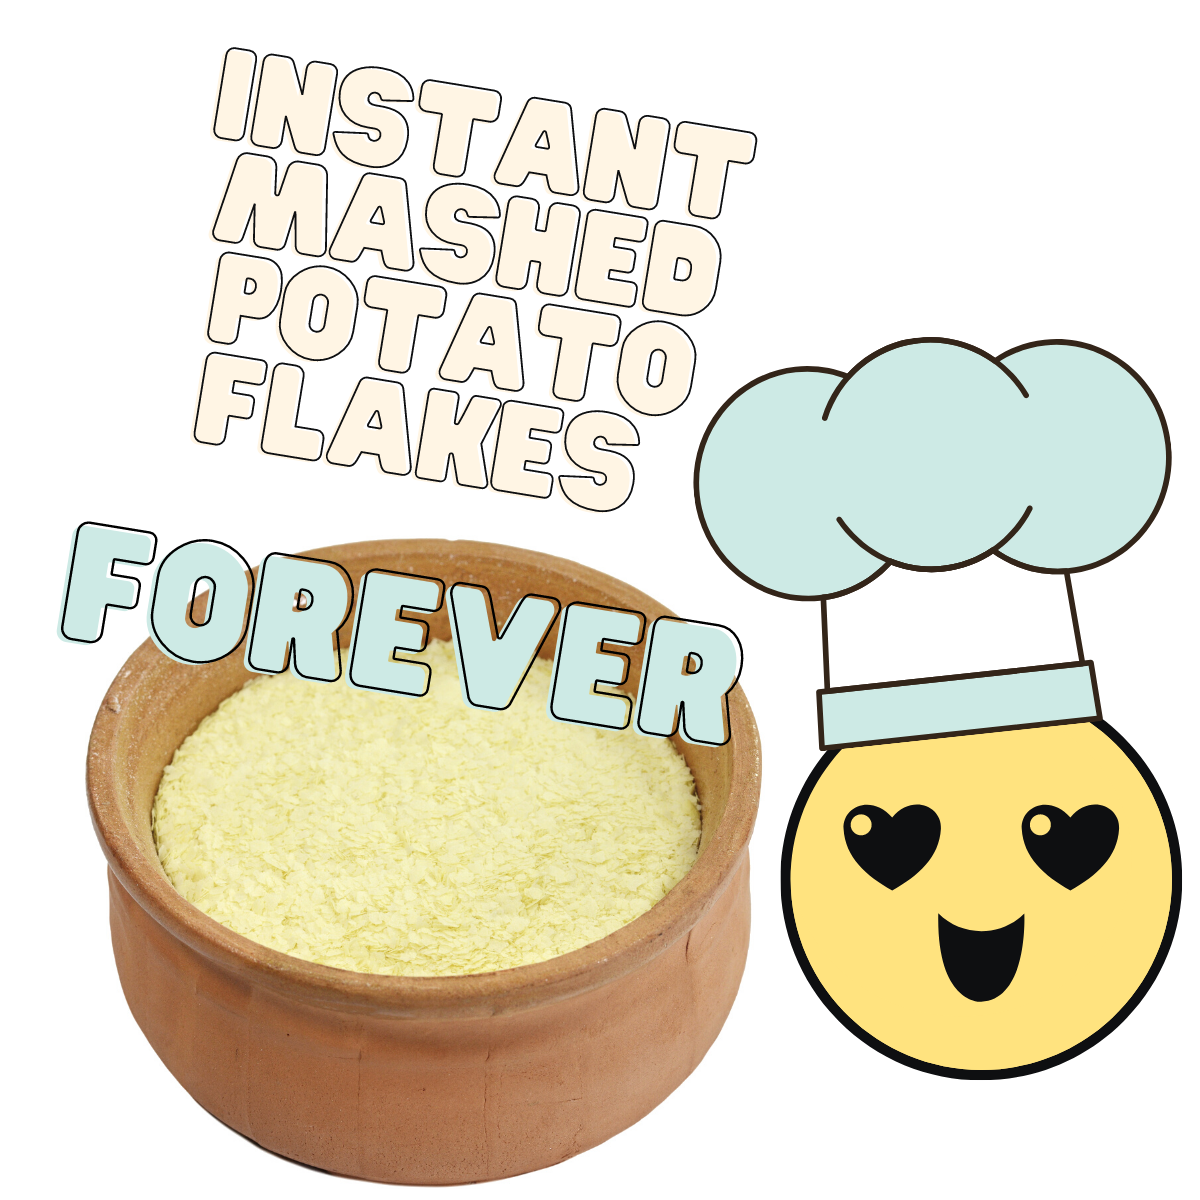 10 Reasons to Embrace Instant Mashed Potato Flakes, by Laura Vincent